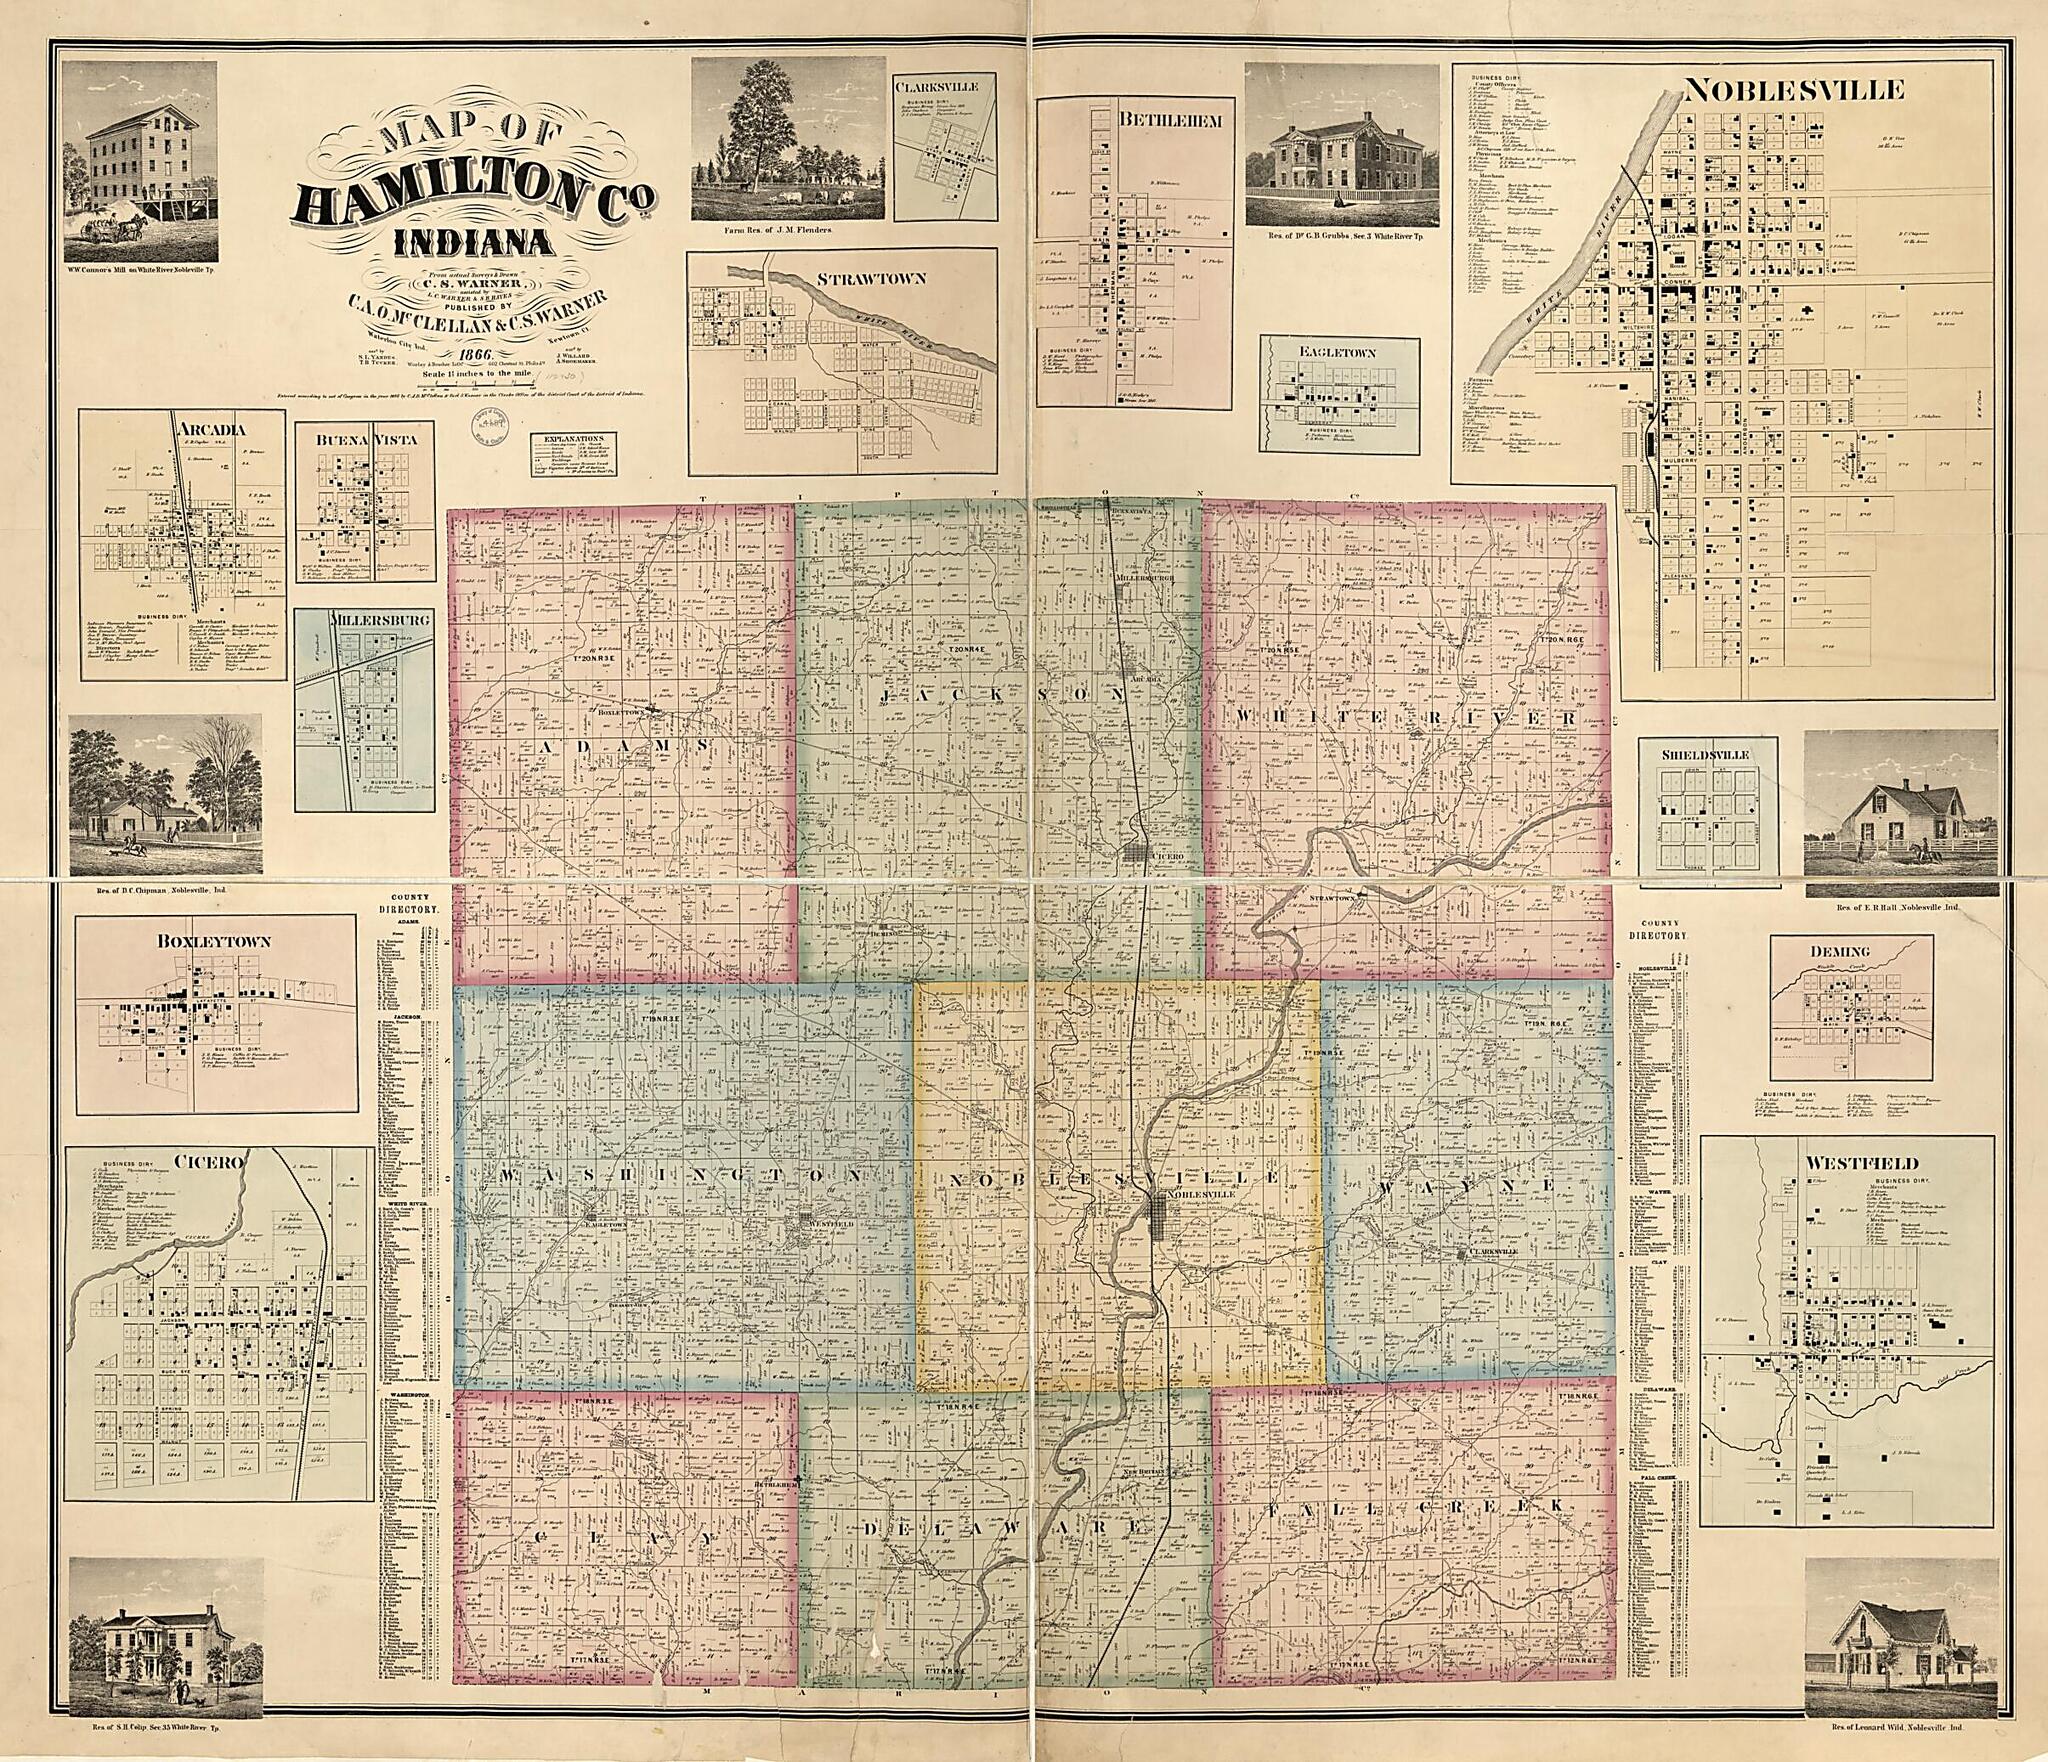 This old map of Map of Hamilton County, Indiana from 1866 was created by C. A. O. McClellan, C. S. Warner, L.C. Warner,  Worley &amp; Bracher in 1866